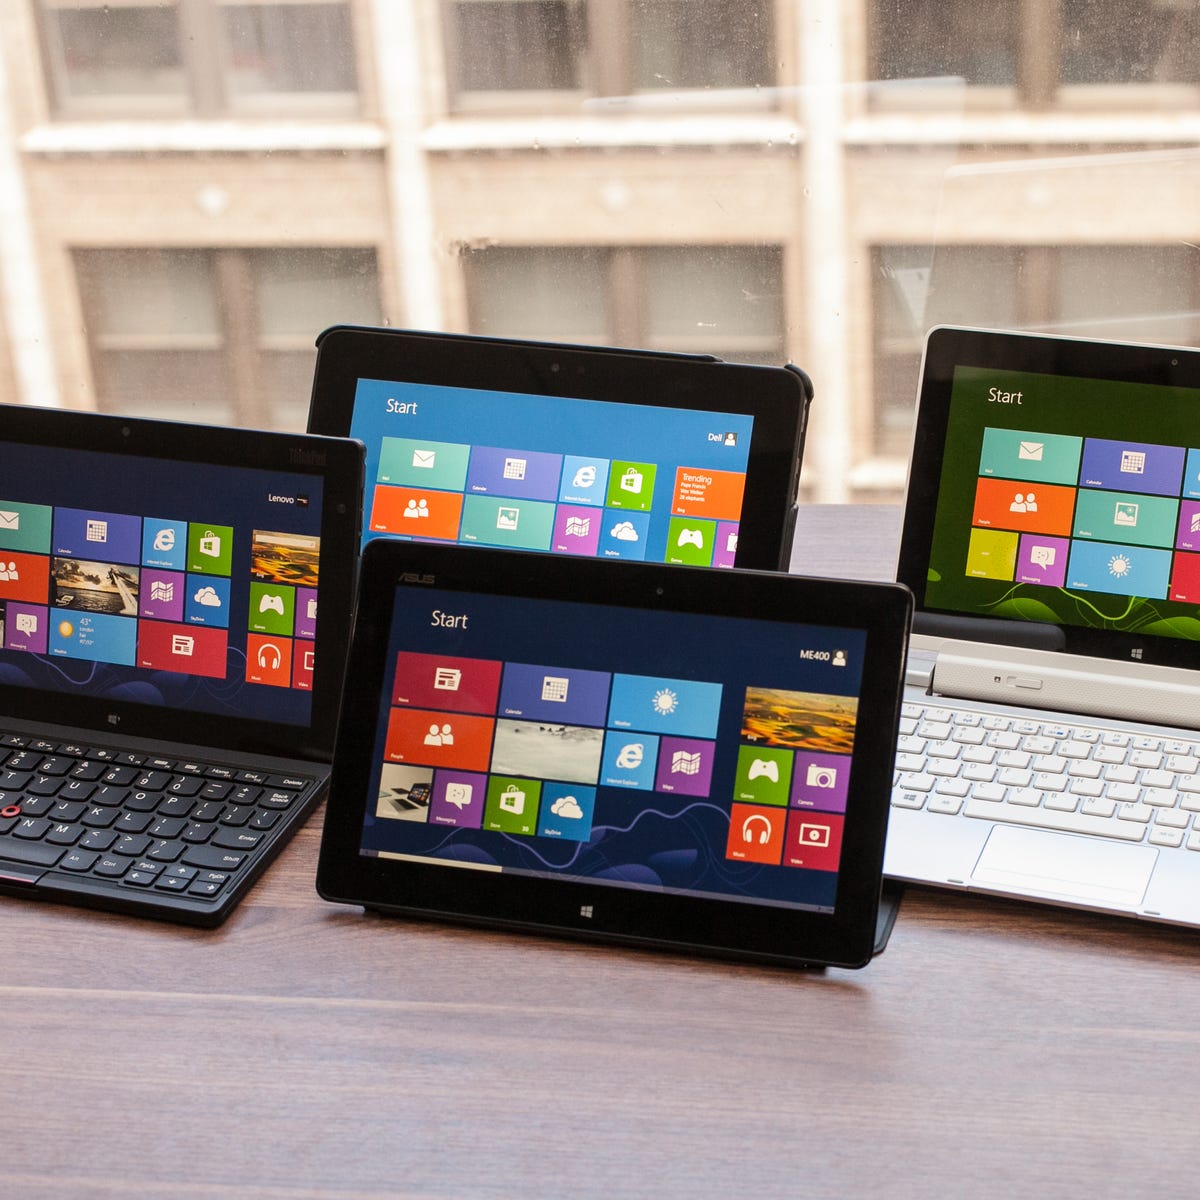 What's the best low-power Windows 8 tablet? - CNET